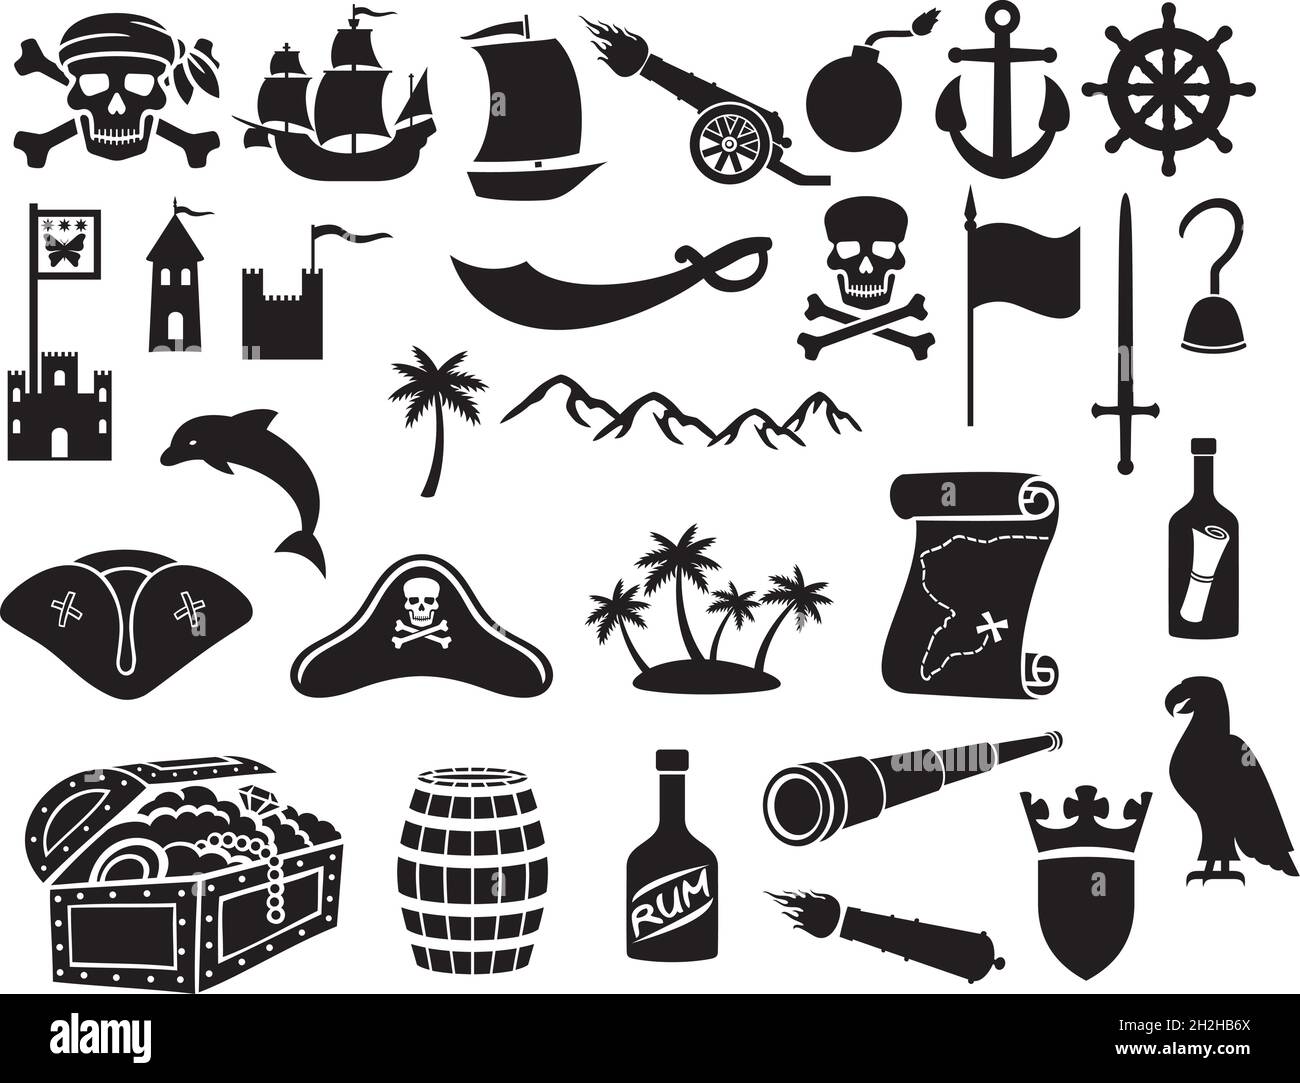 Pirates icons set vector illustration Stock Vector